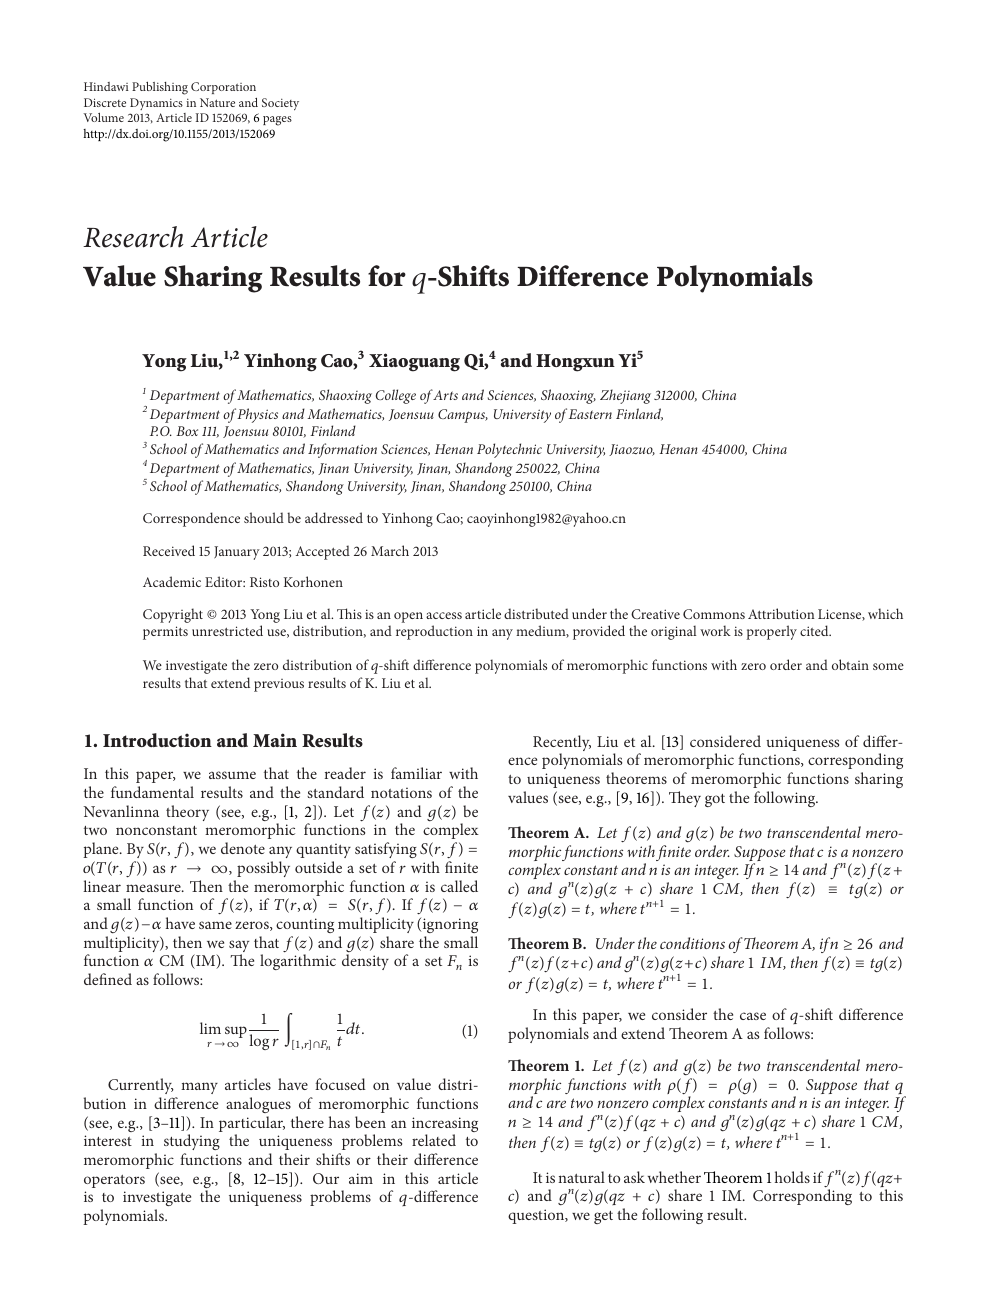 Value Sharing Results For Q Shifts Difference Polynomials Topic Of Research Paper In Mathematics Download Scholarly Article Pdf And Read For Free On Cyberleninka Open Science Hub